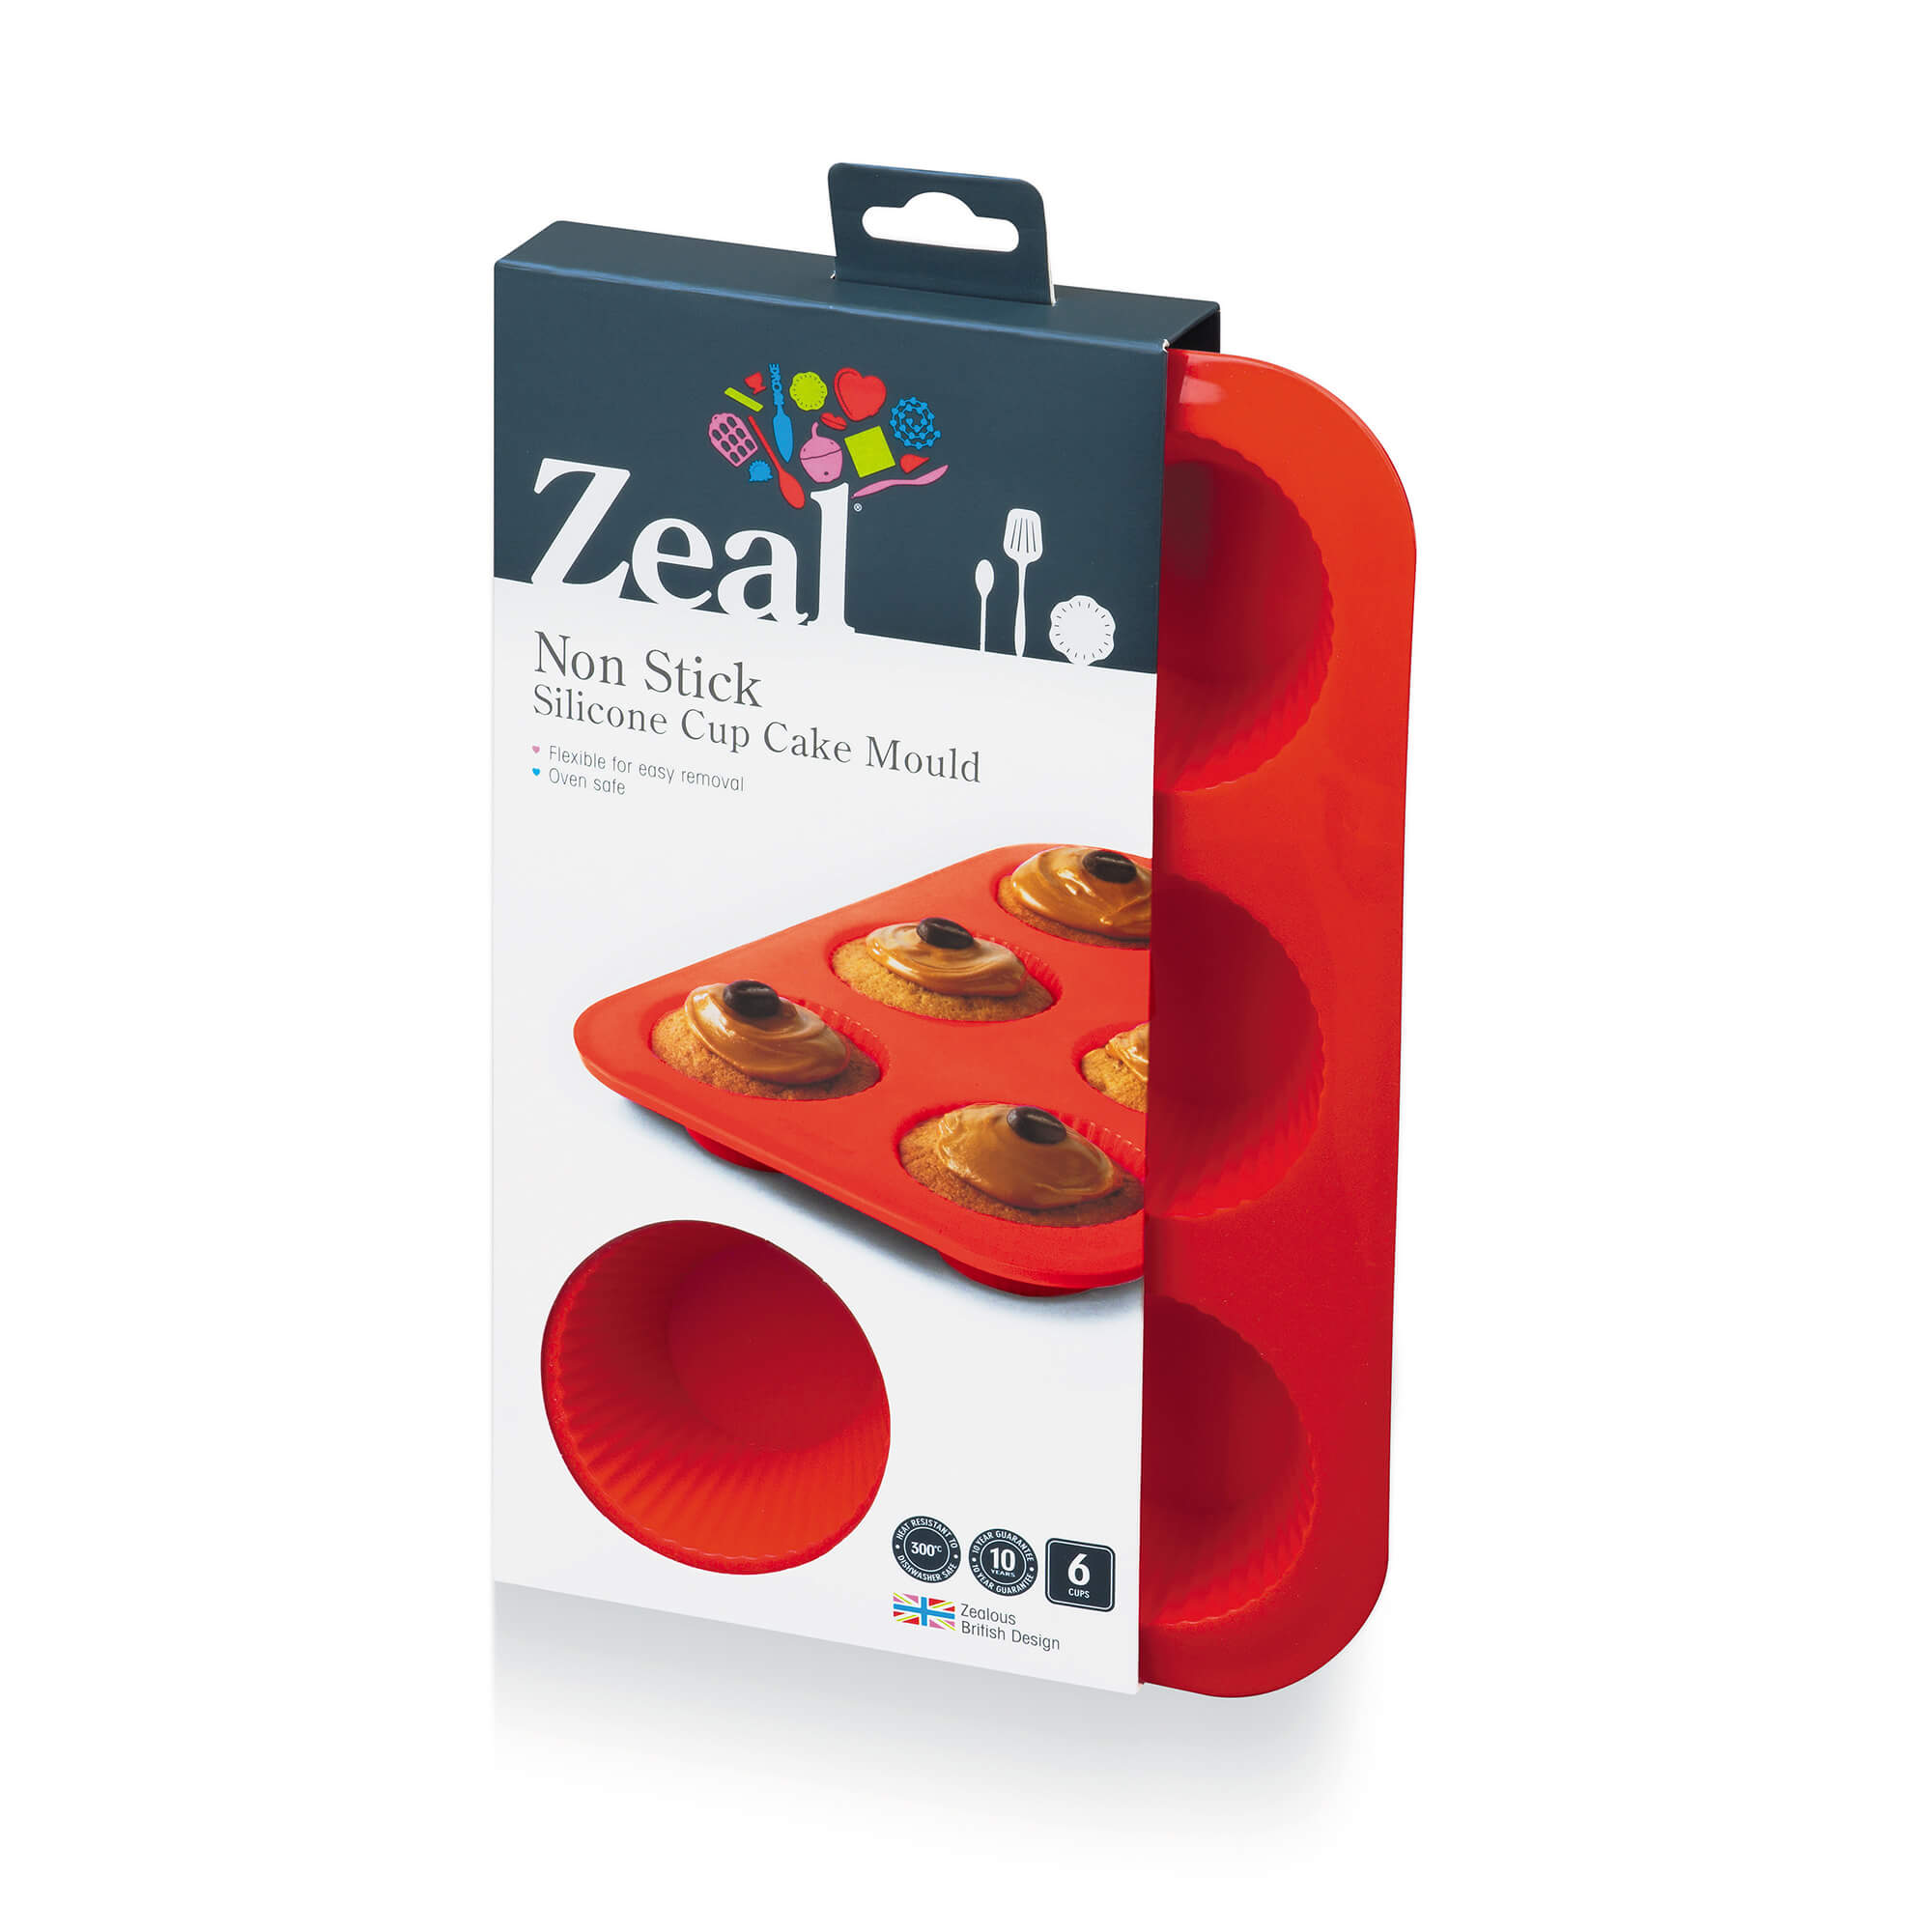 Zeal 6 Cup Non Stick Silicone Fairy Cake Mould in packaging